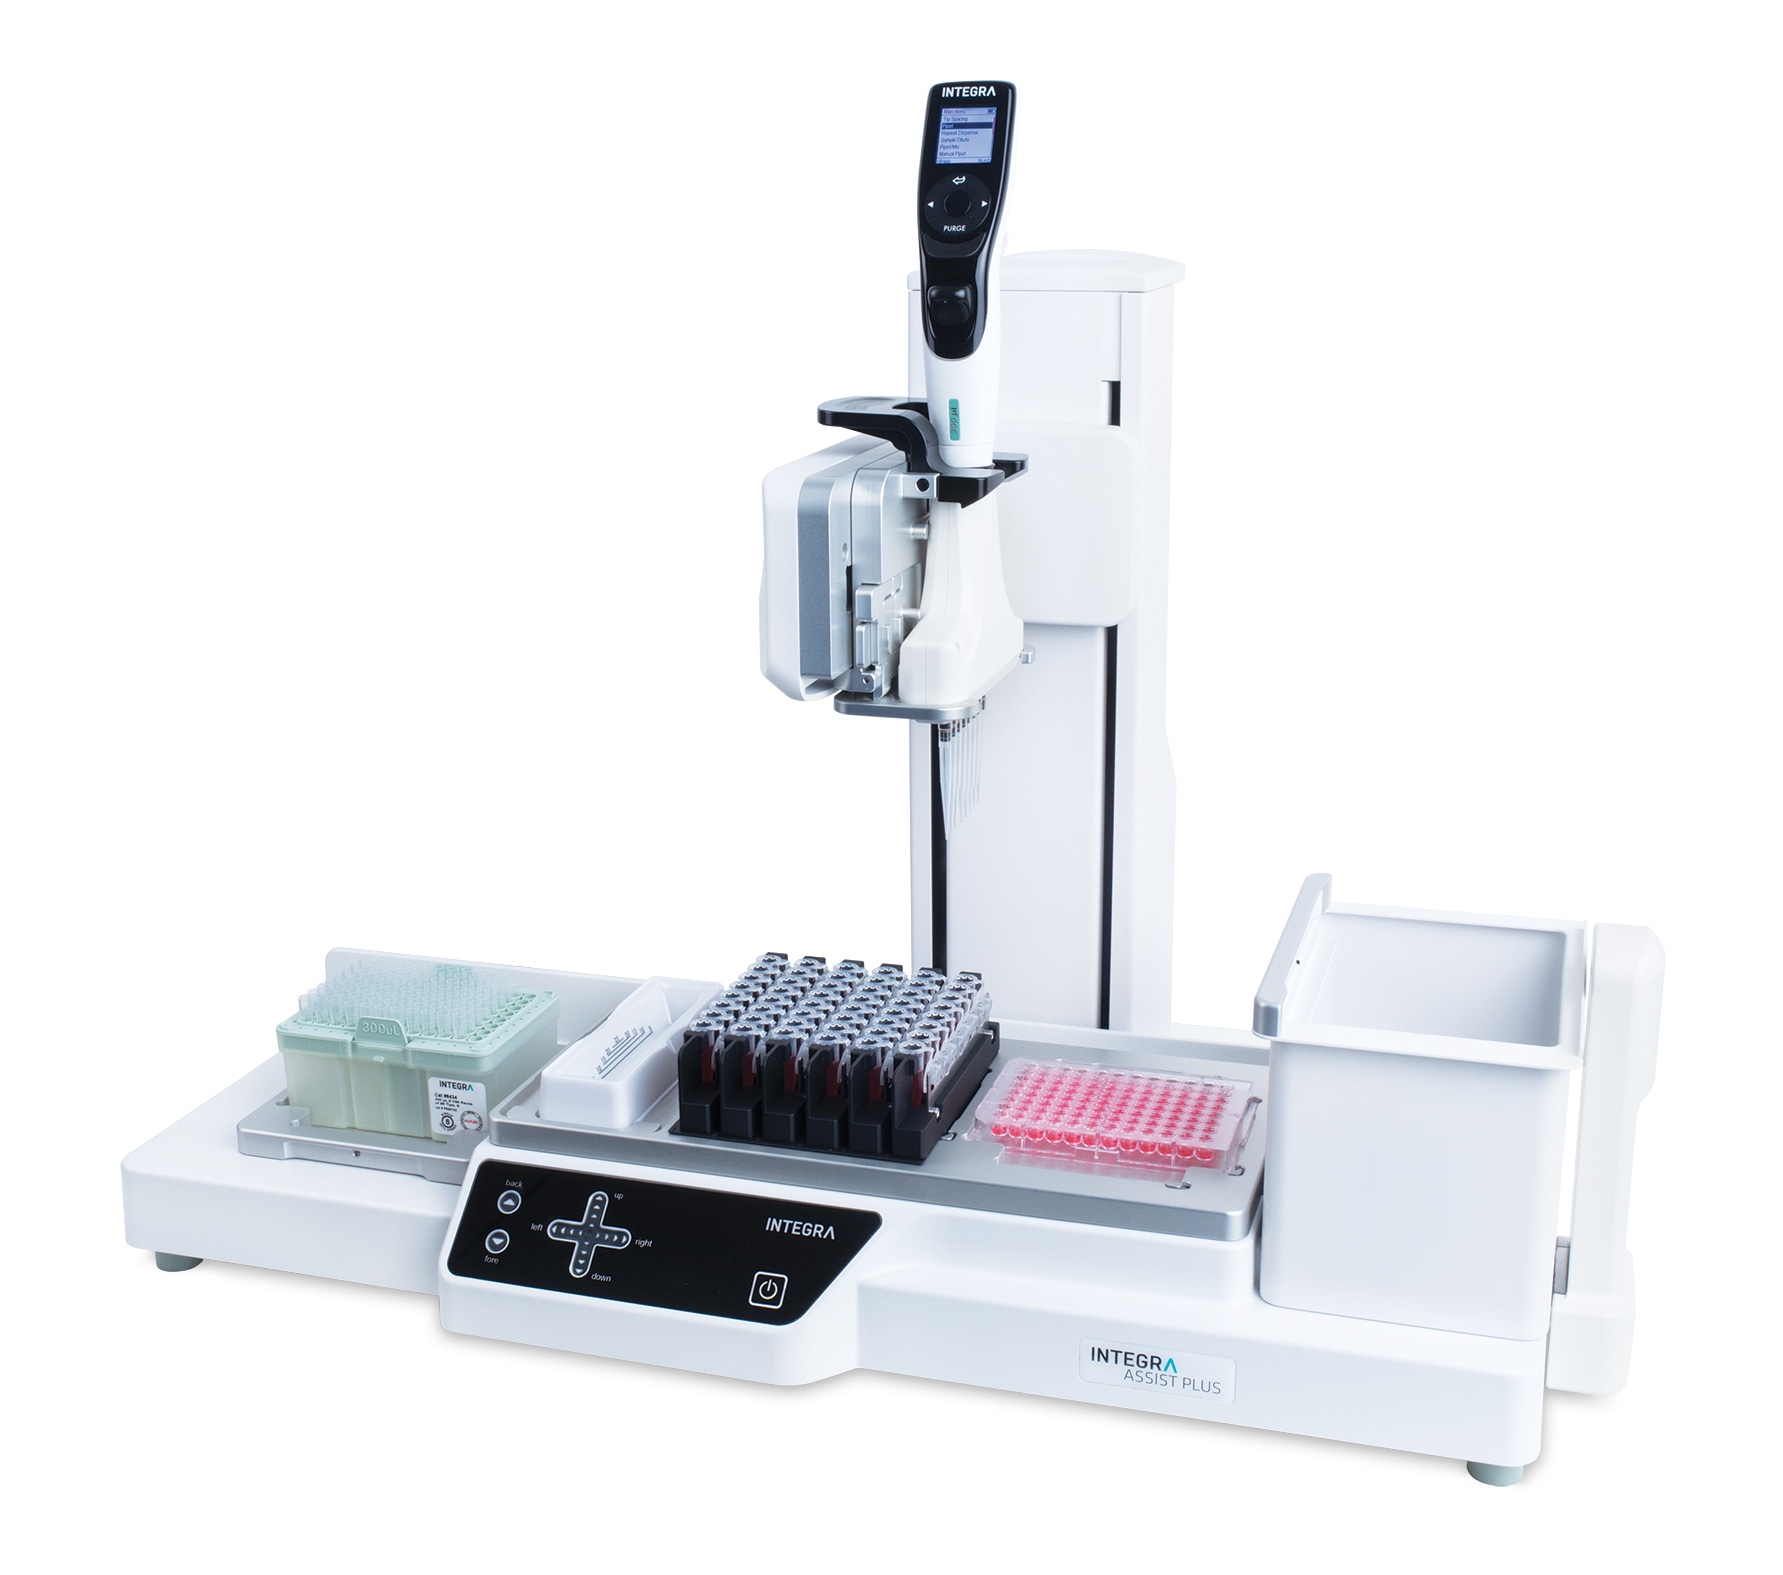 Assist Plus Pipetting Robot from Integra Biosciences